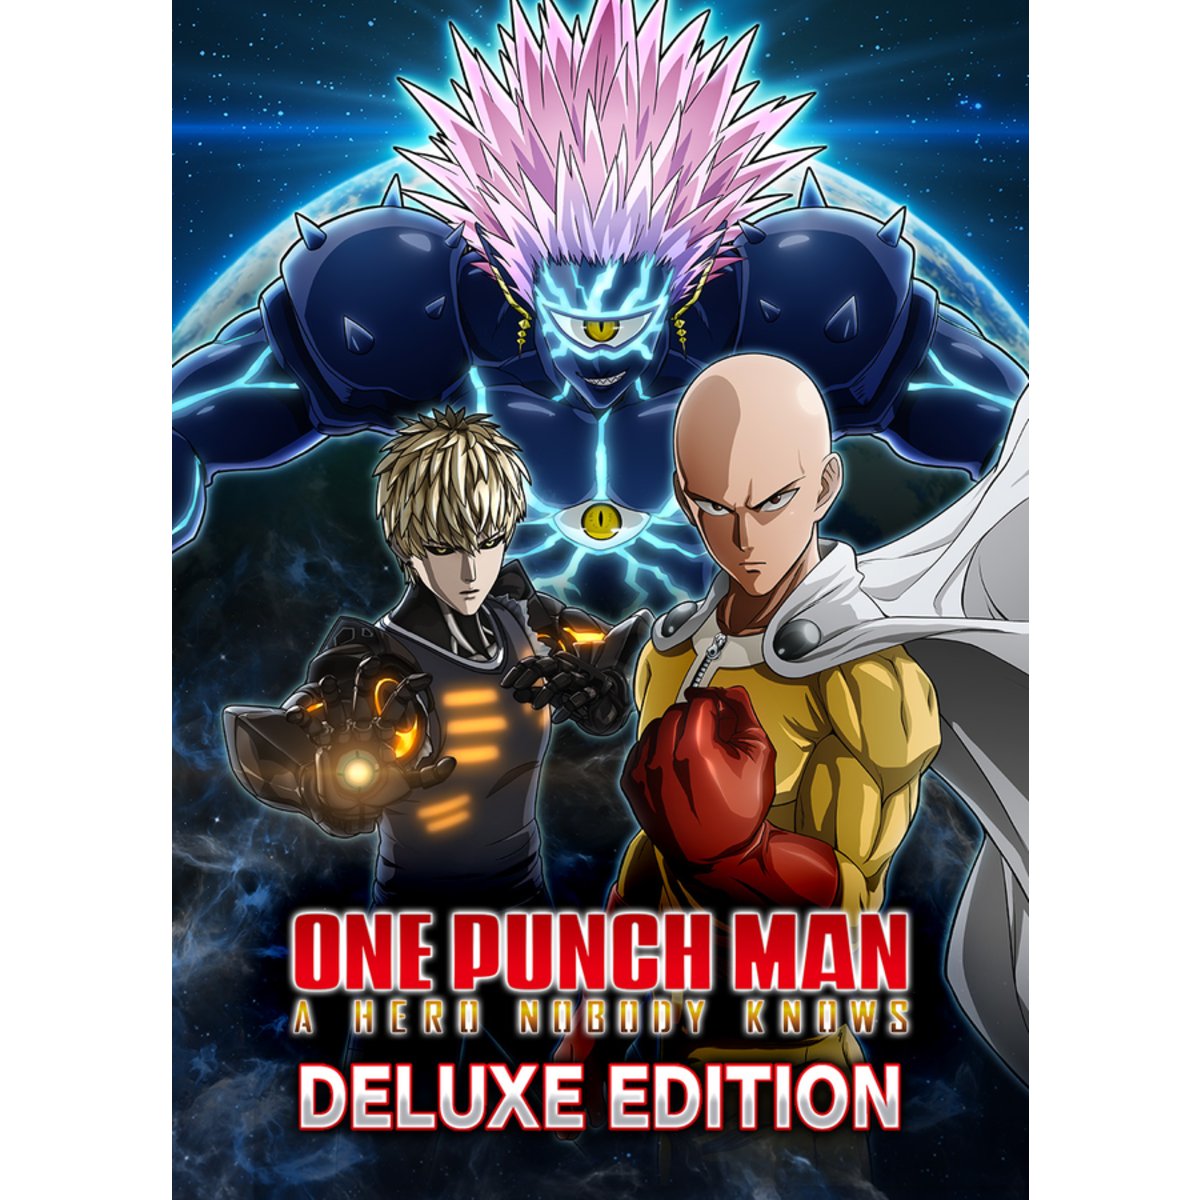 SALE: £39.85 One Punch Man: A Hero Nobody Knows Deluxe Edition #PC DIGITAL #BANDAINAMCOEntertainment: The Deluxe Edition includes the Full Game, Character Pass, and 4 Additional Outfits.The first 'One Punch Man' game for console and PC finally makes its… dlvr.it/T6SprH